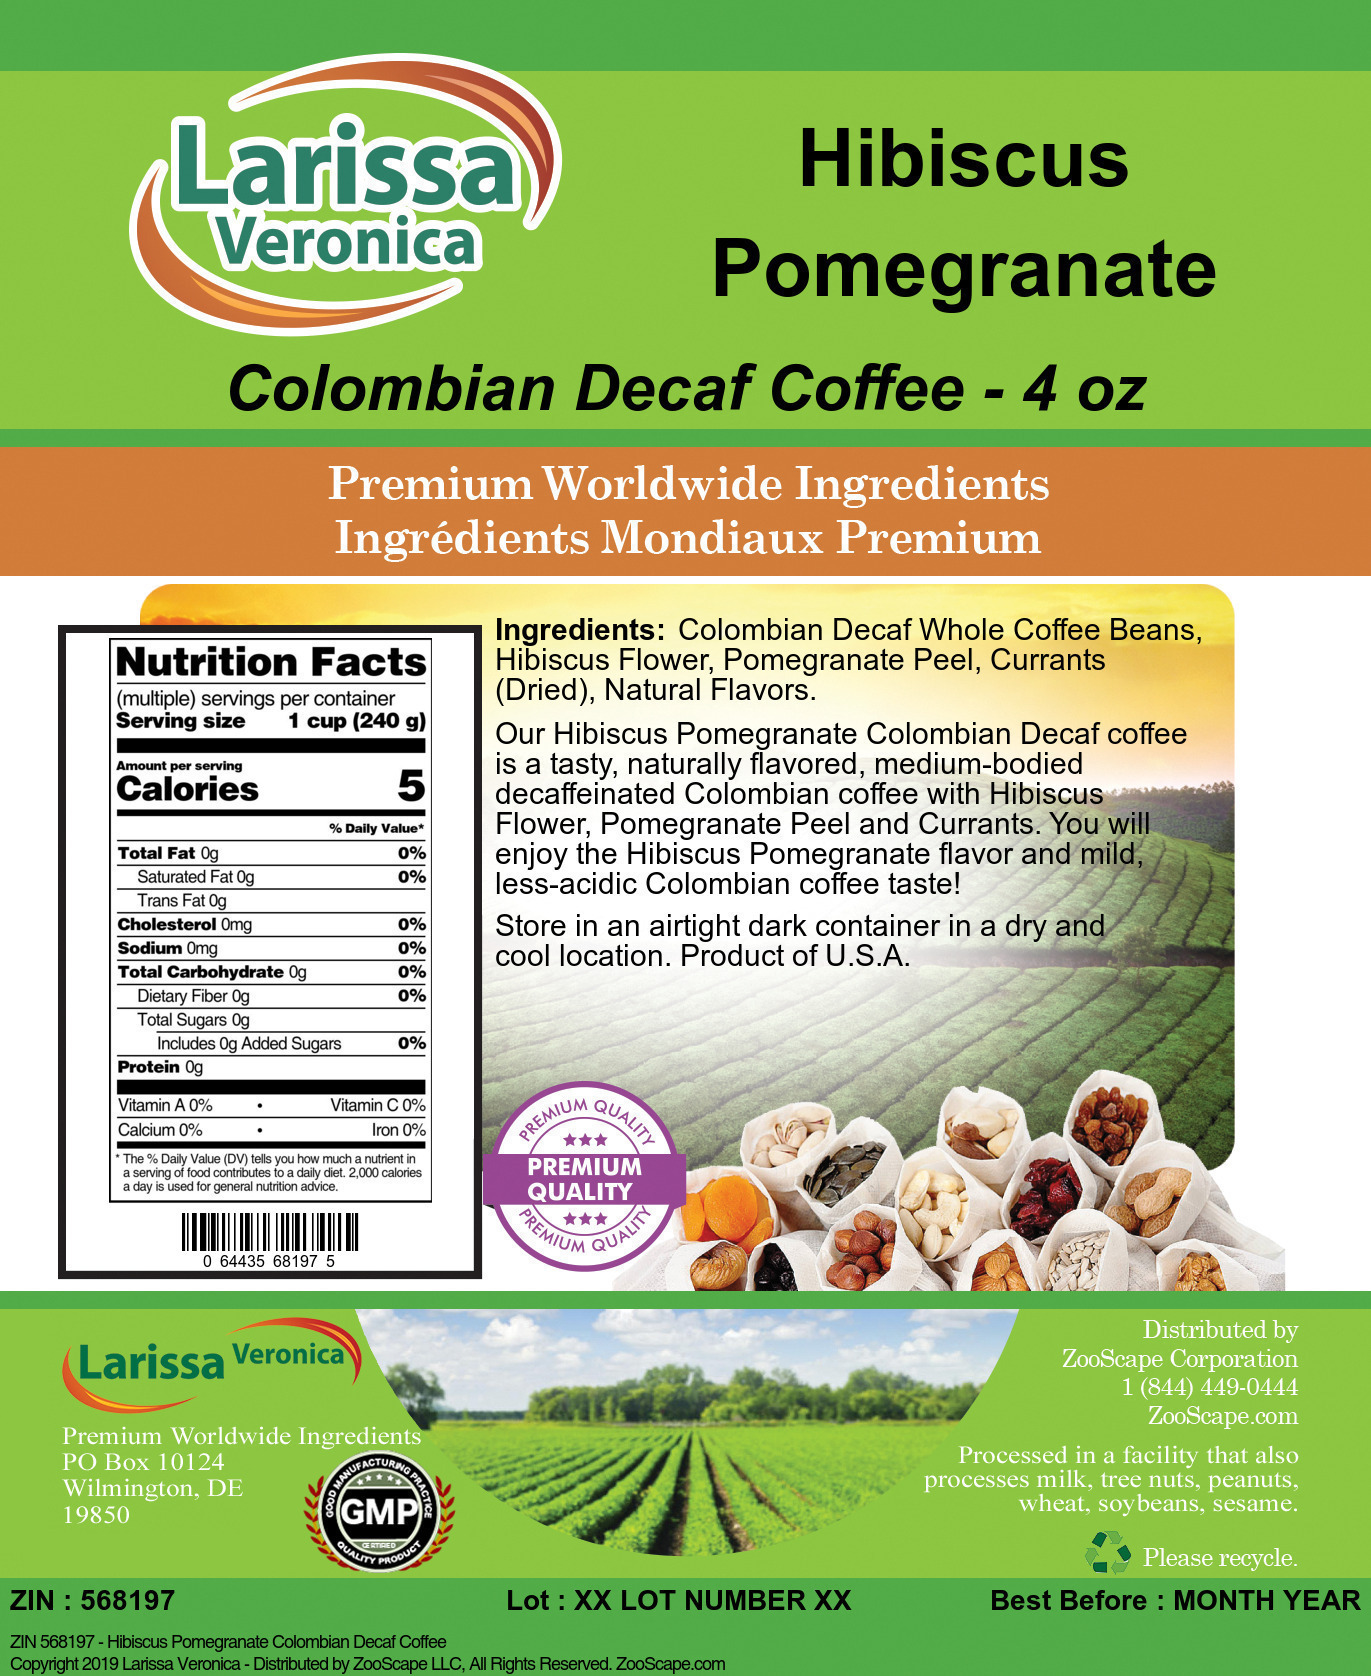 Hibiscus Pomegranate Colombian Decaf Coffee - Label